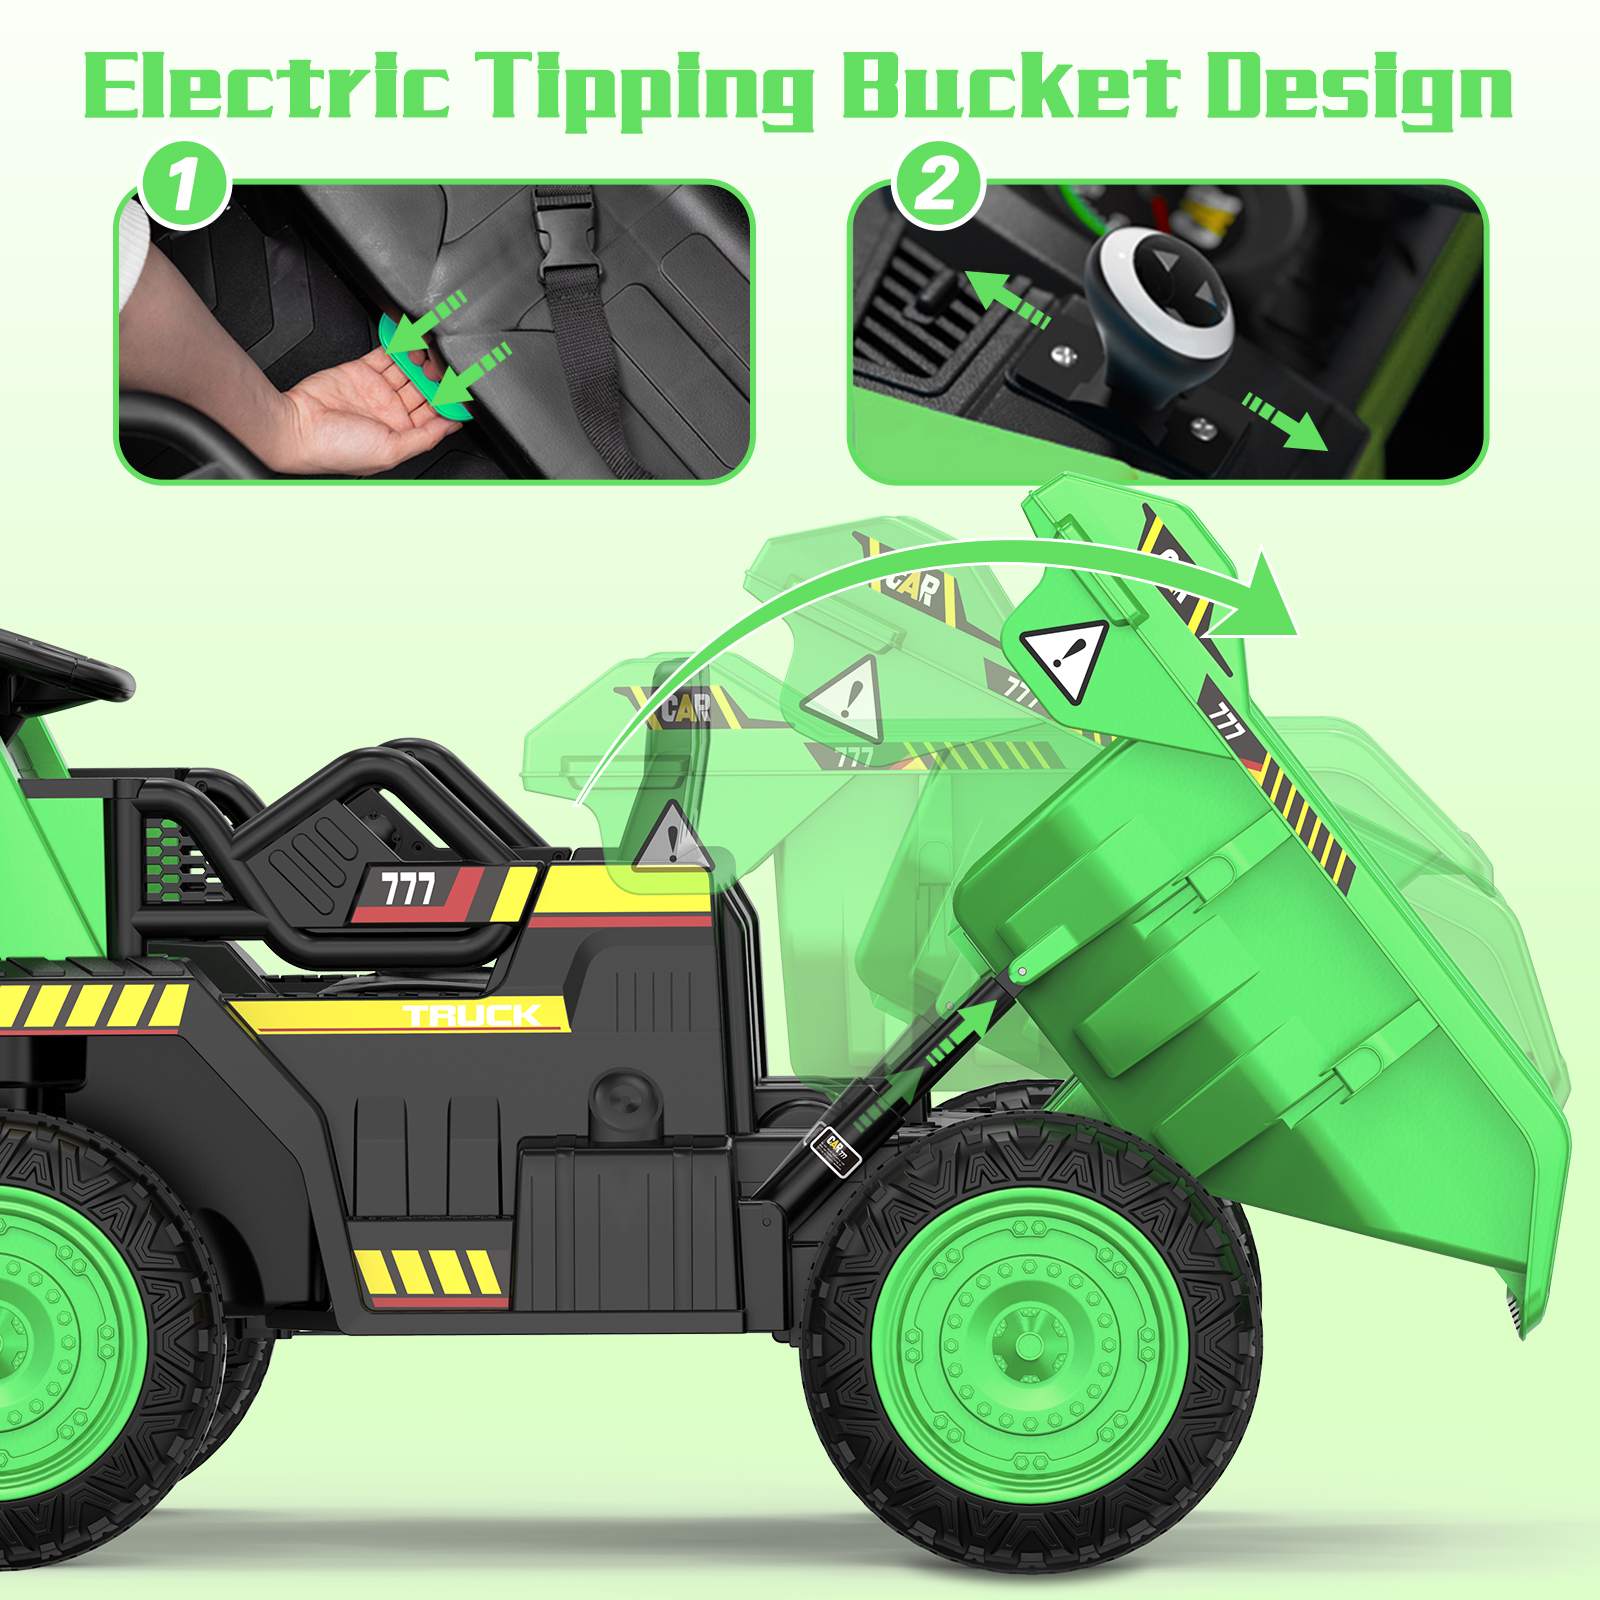 TOKTOO 12Volt Battery Powered Ride on Tractor w/ Remote Control, Music Player, Electric Dump Bed-Green - image 3 of 13